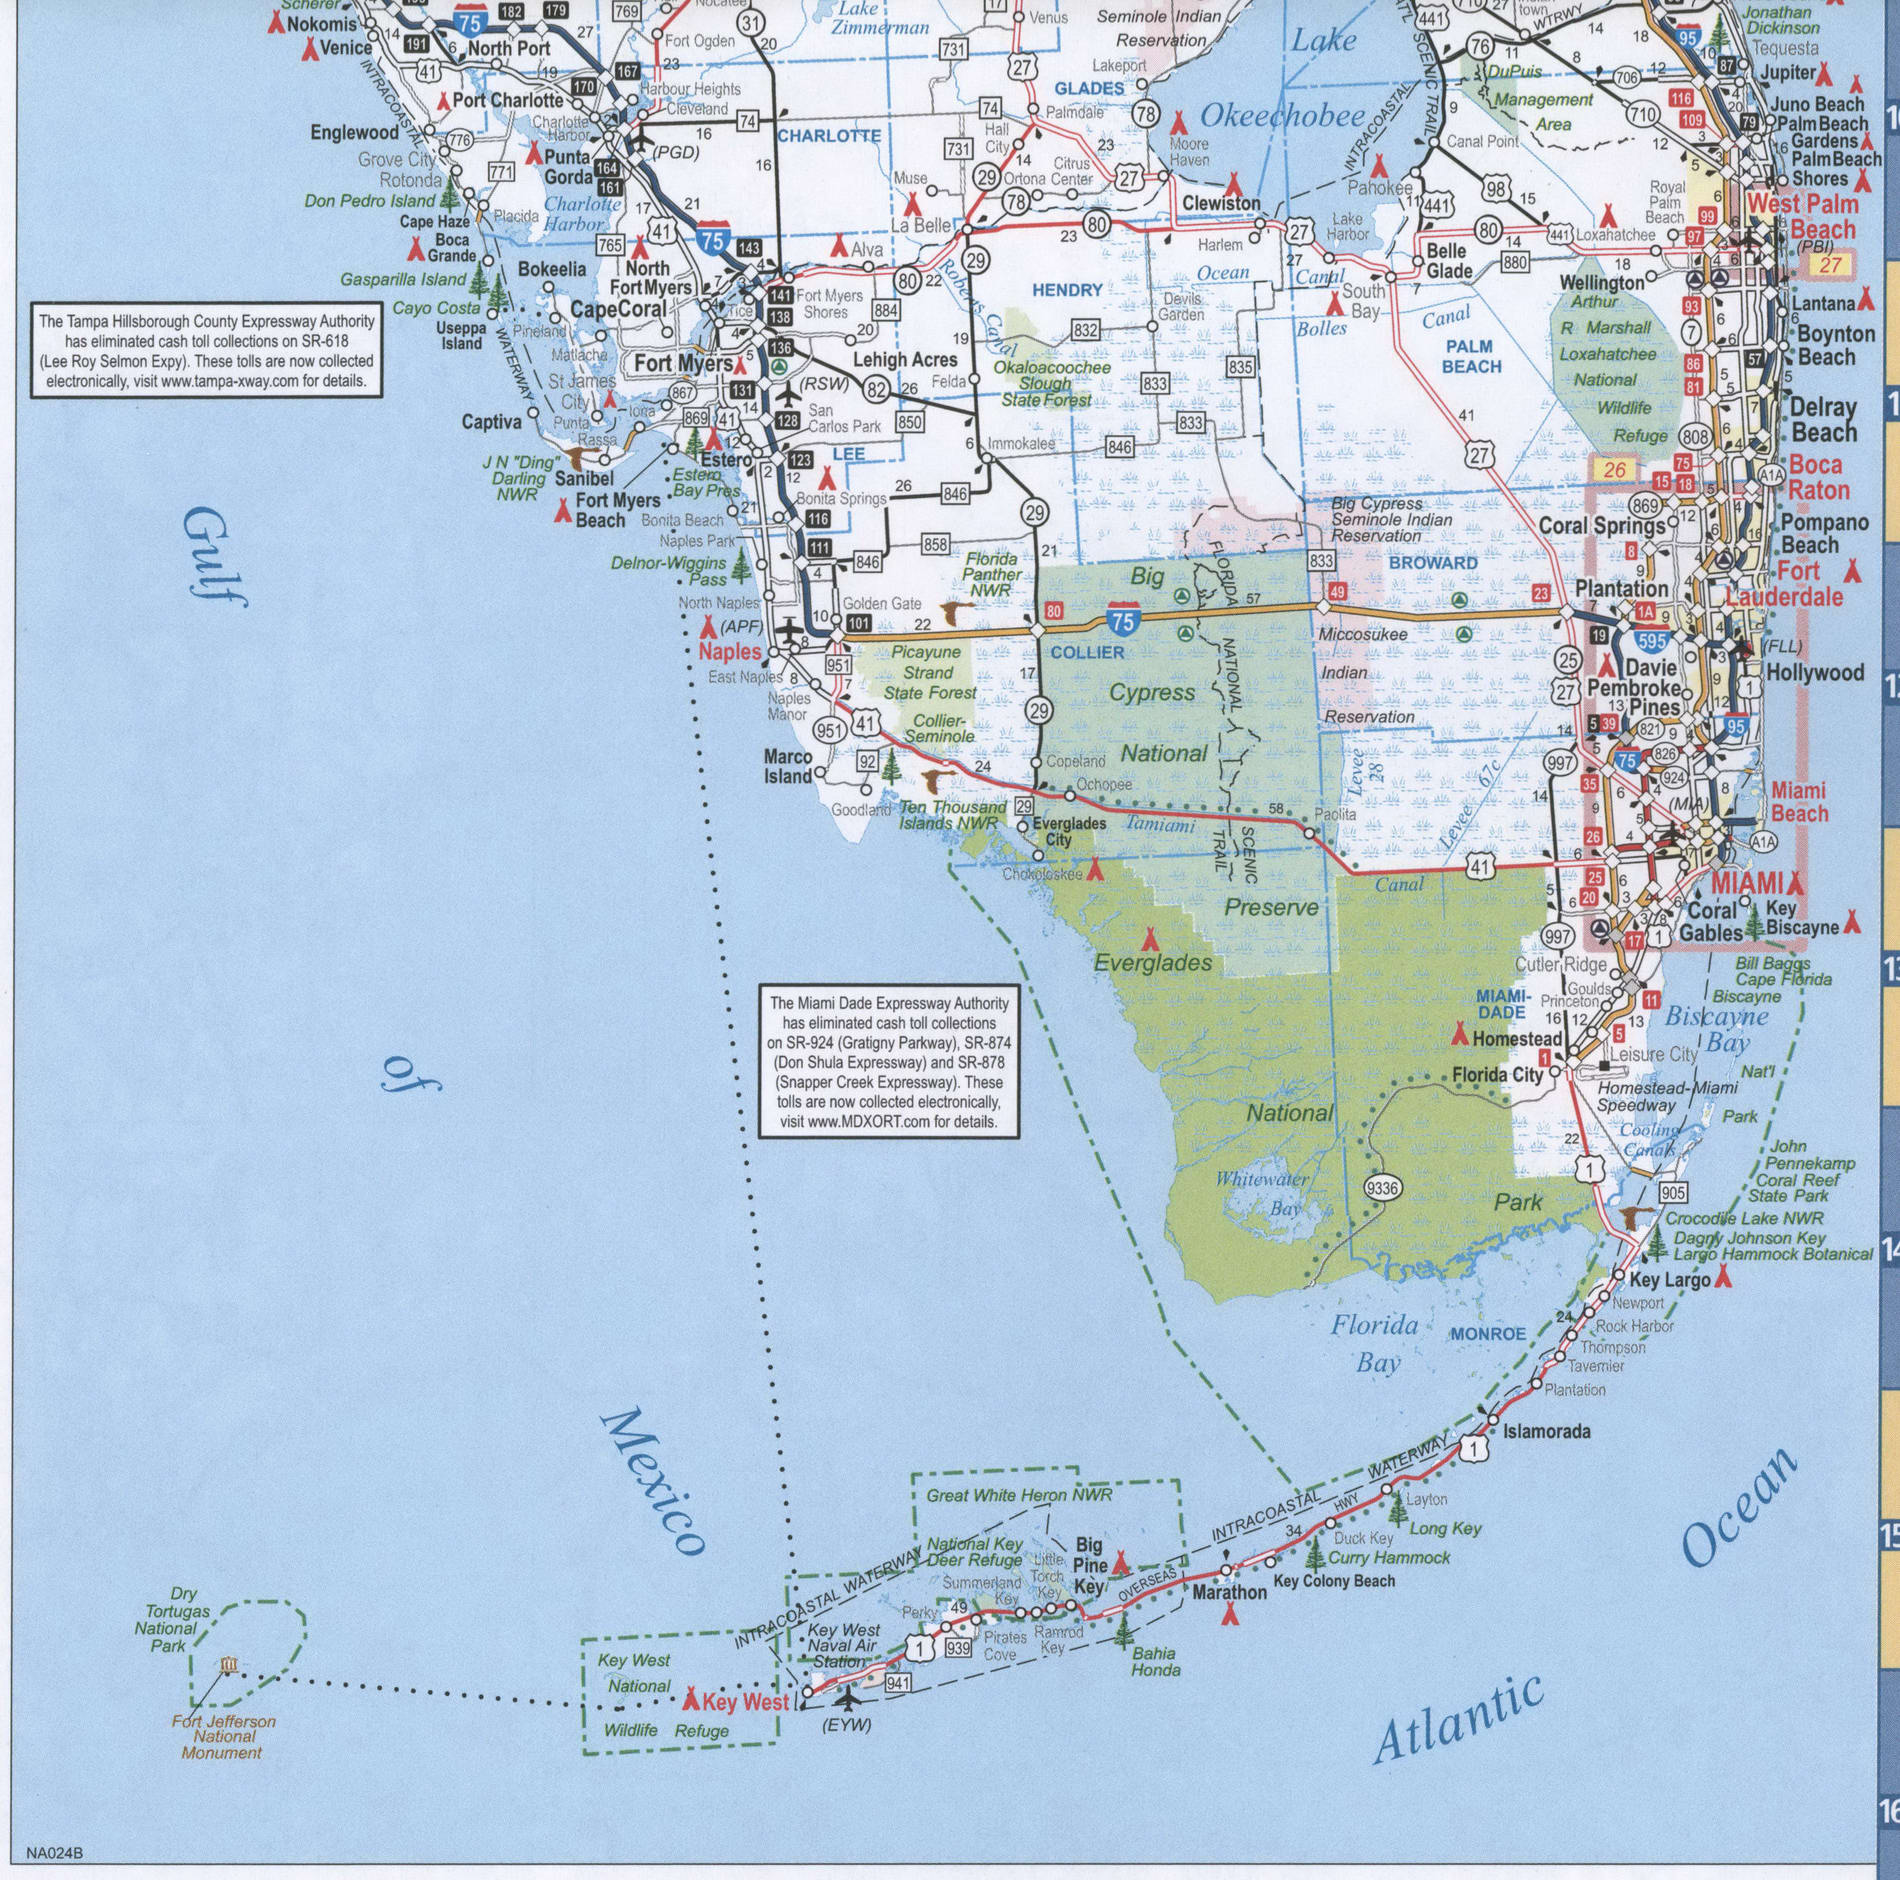 South of Florida state road map image. Detailed map of Southern Florida